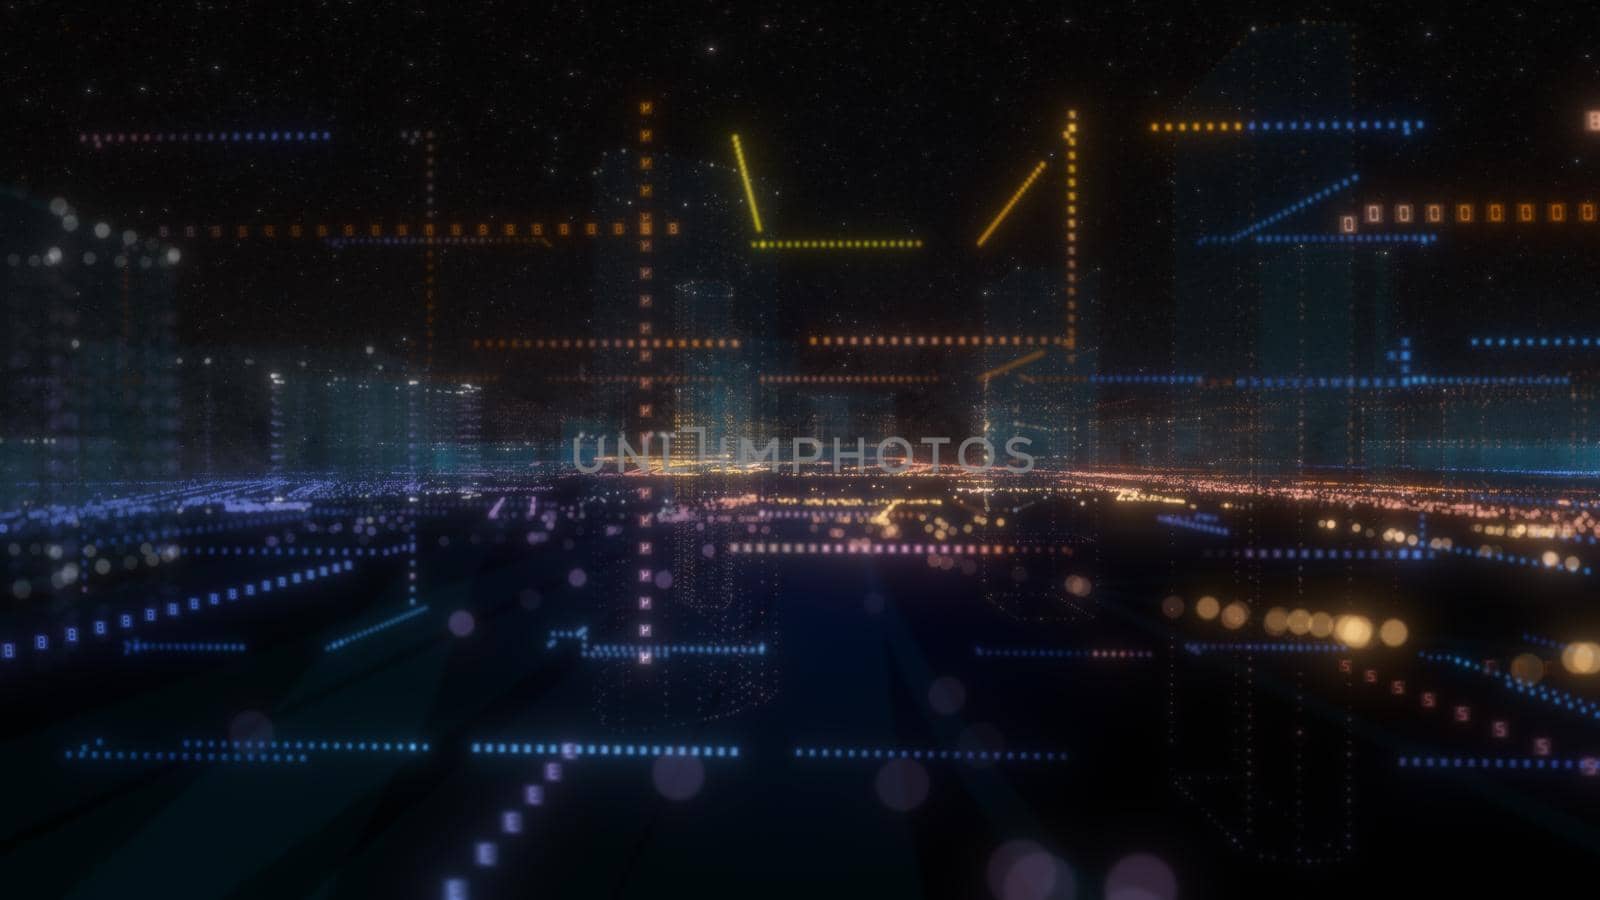 Futuristic Smart Digital City. Buildings, Code, Galaxy and Roads. Smart City And Technology Business Concept. 3D Illustration